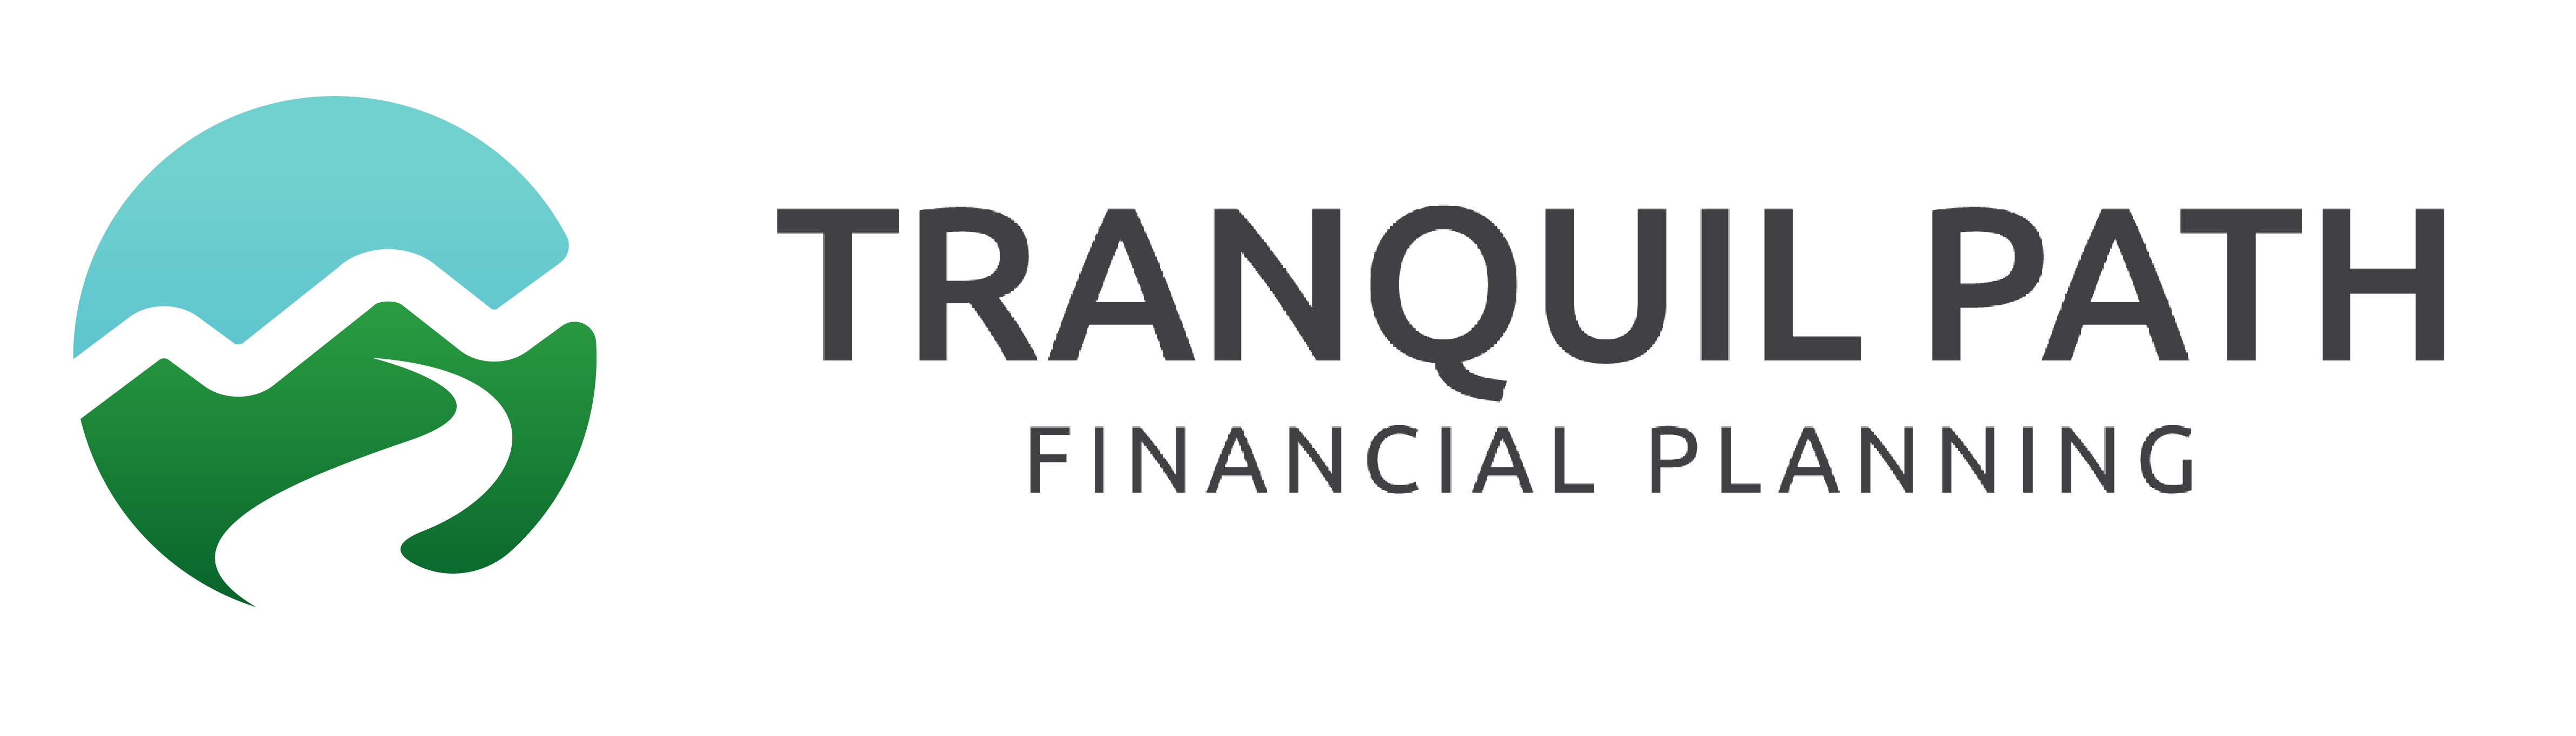 Tranquil Path Financial Planning